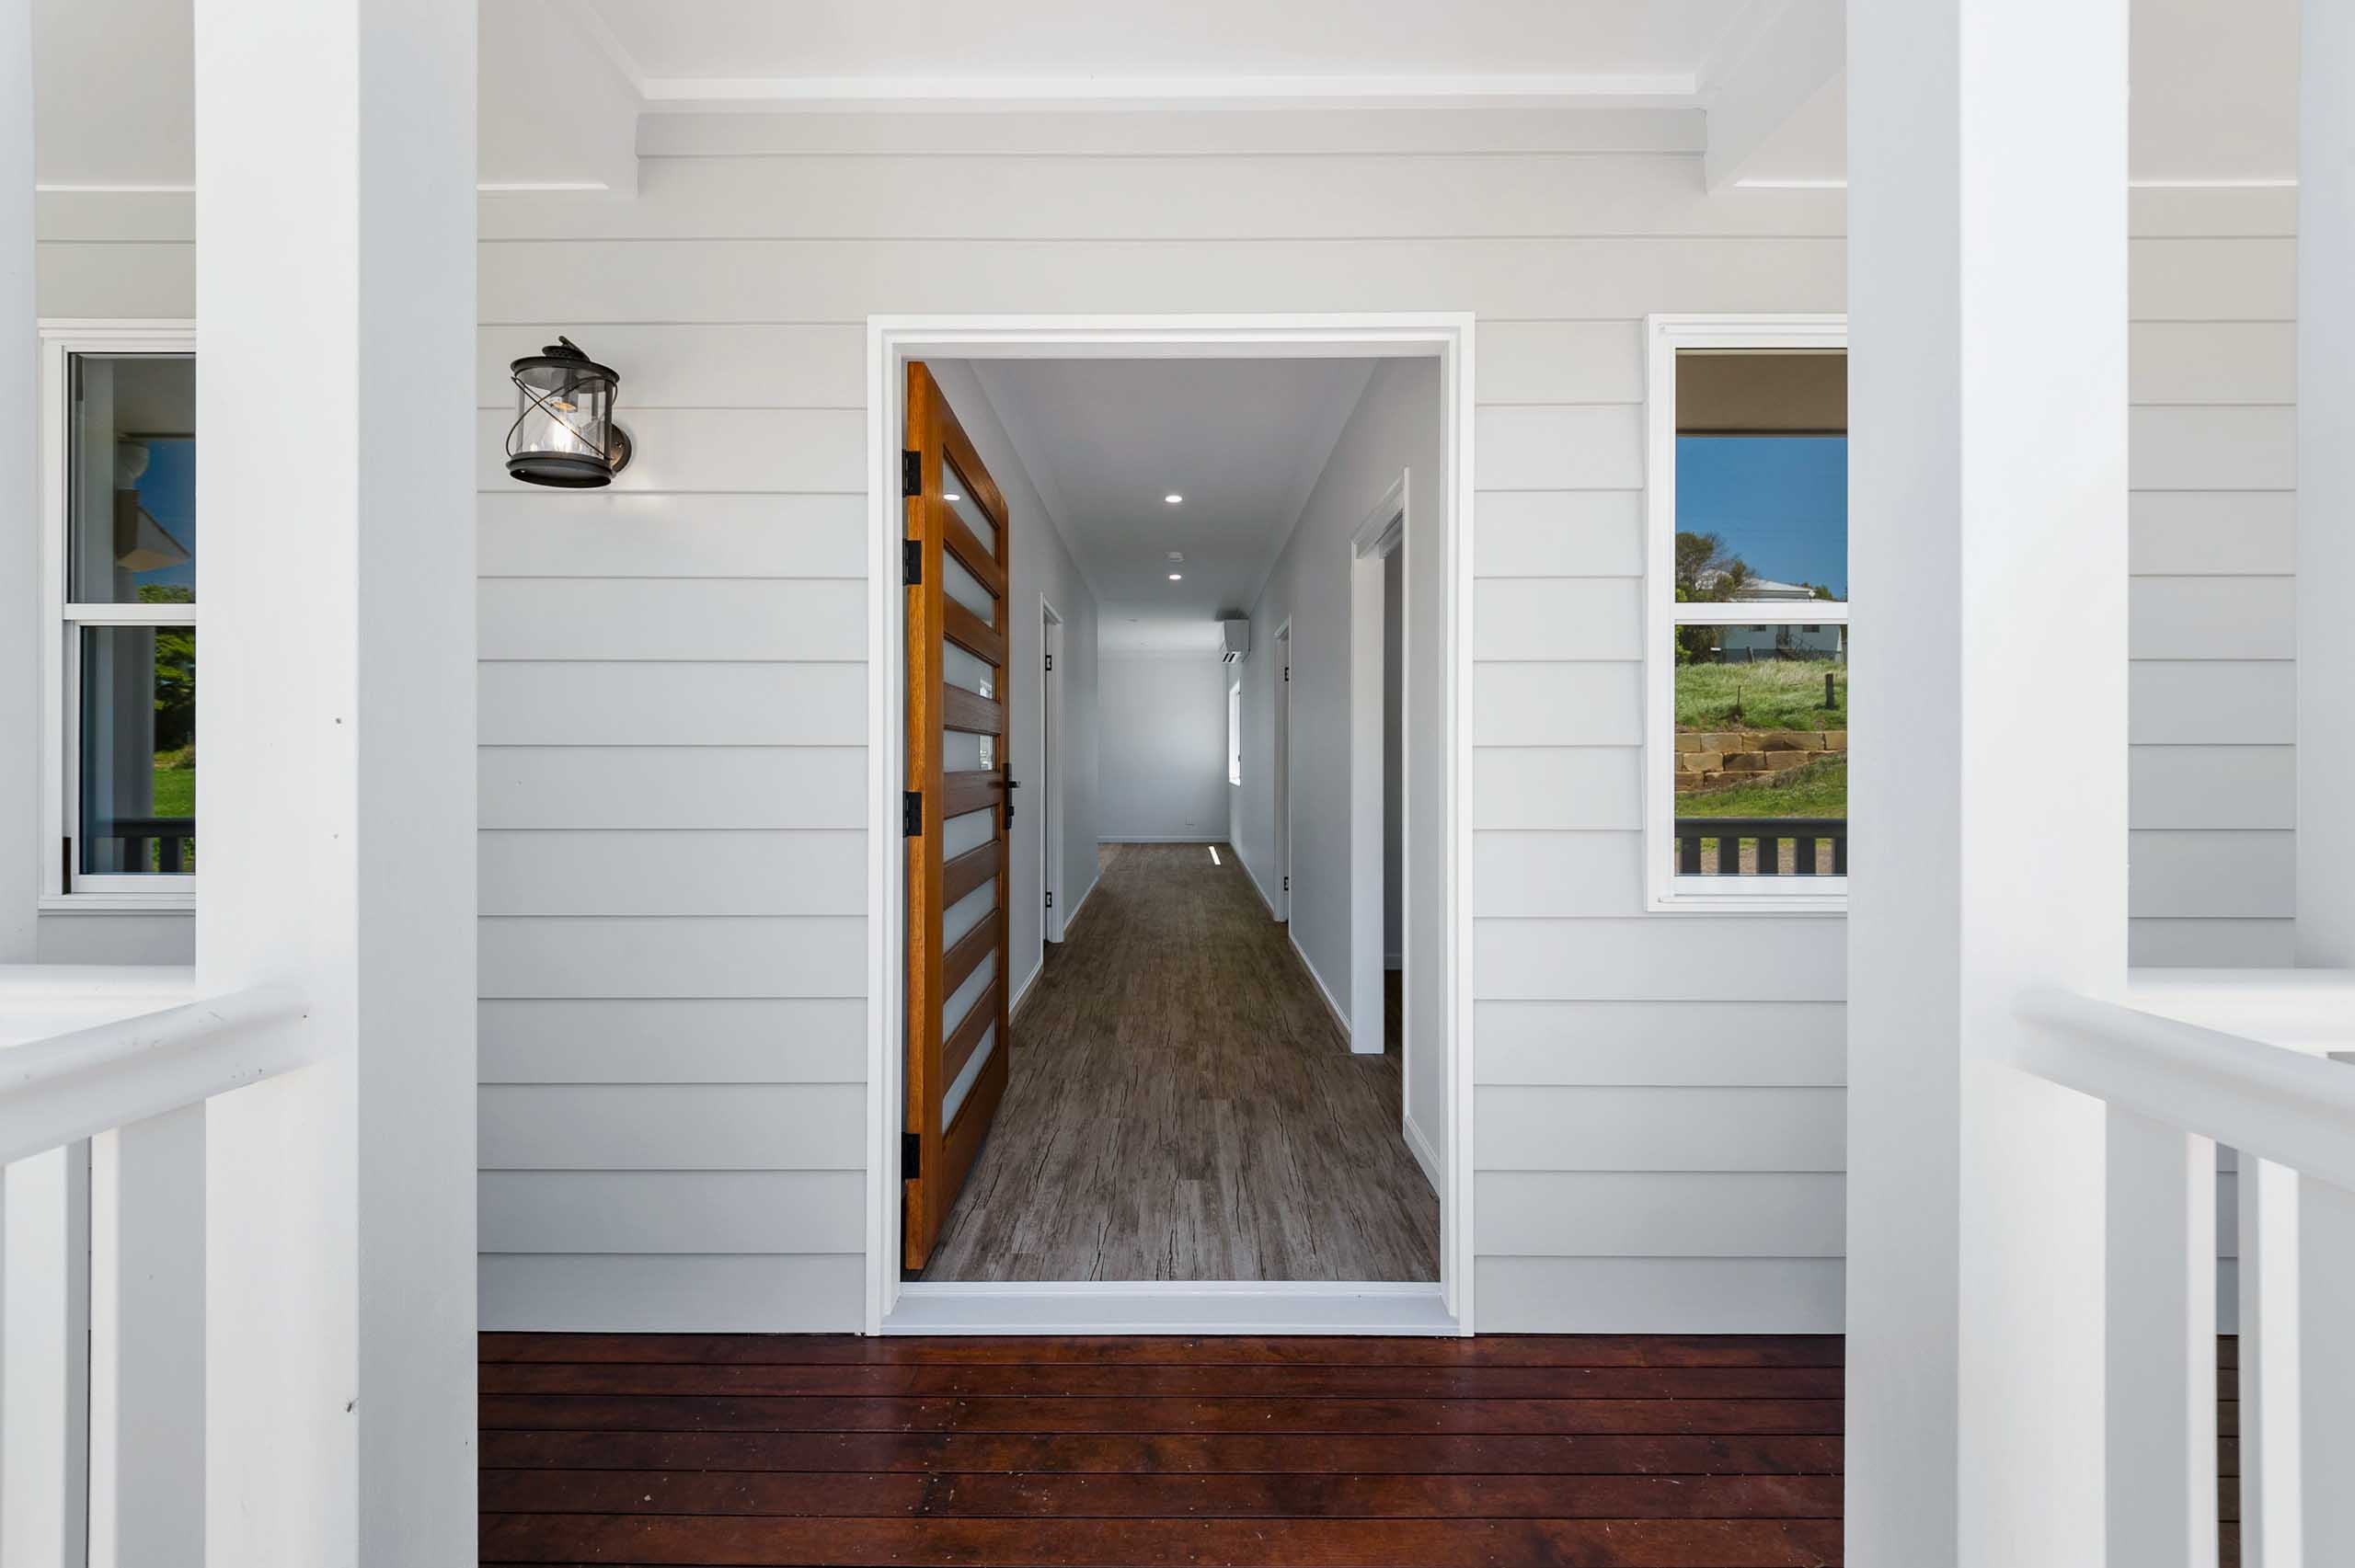 Front Entry to a modern colonial home in Killarney Hills, Qld. Build materials are mostly timber and linear board and colours are neutral with darker timber decking and an extra wide door to create contrast between the textures and surfaces.